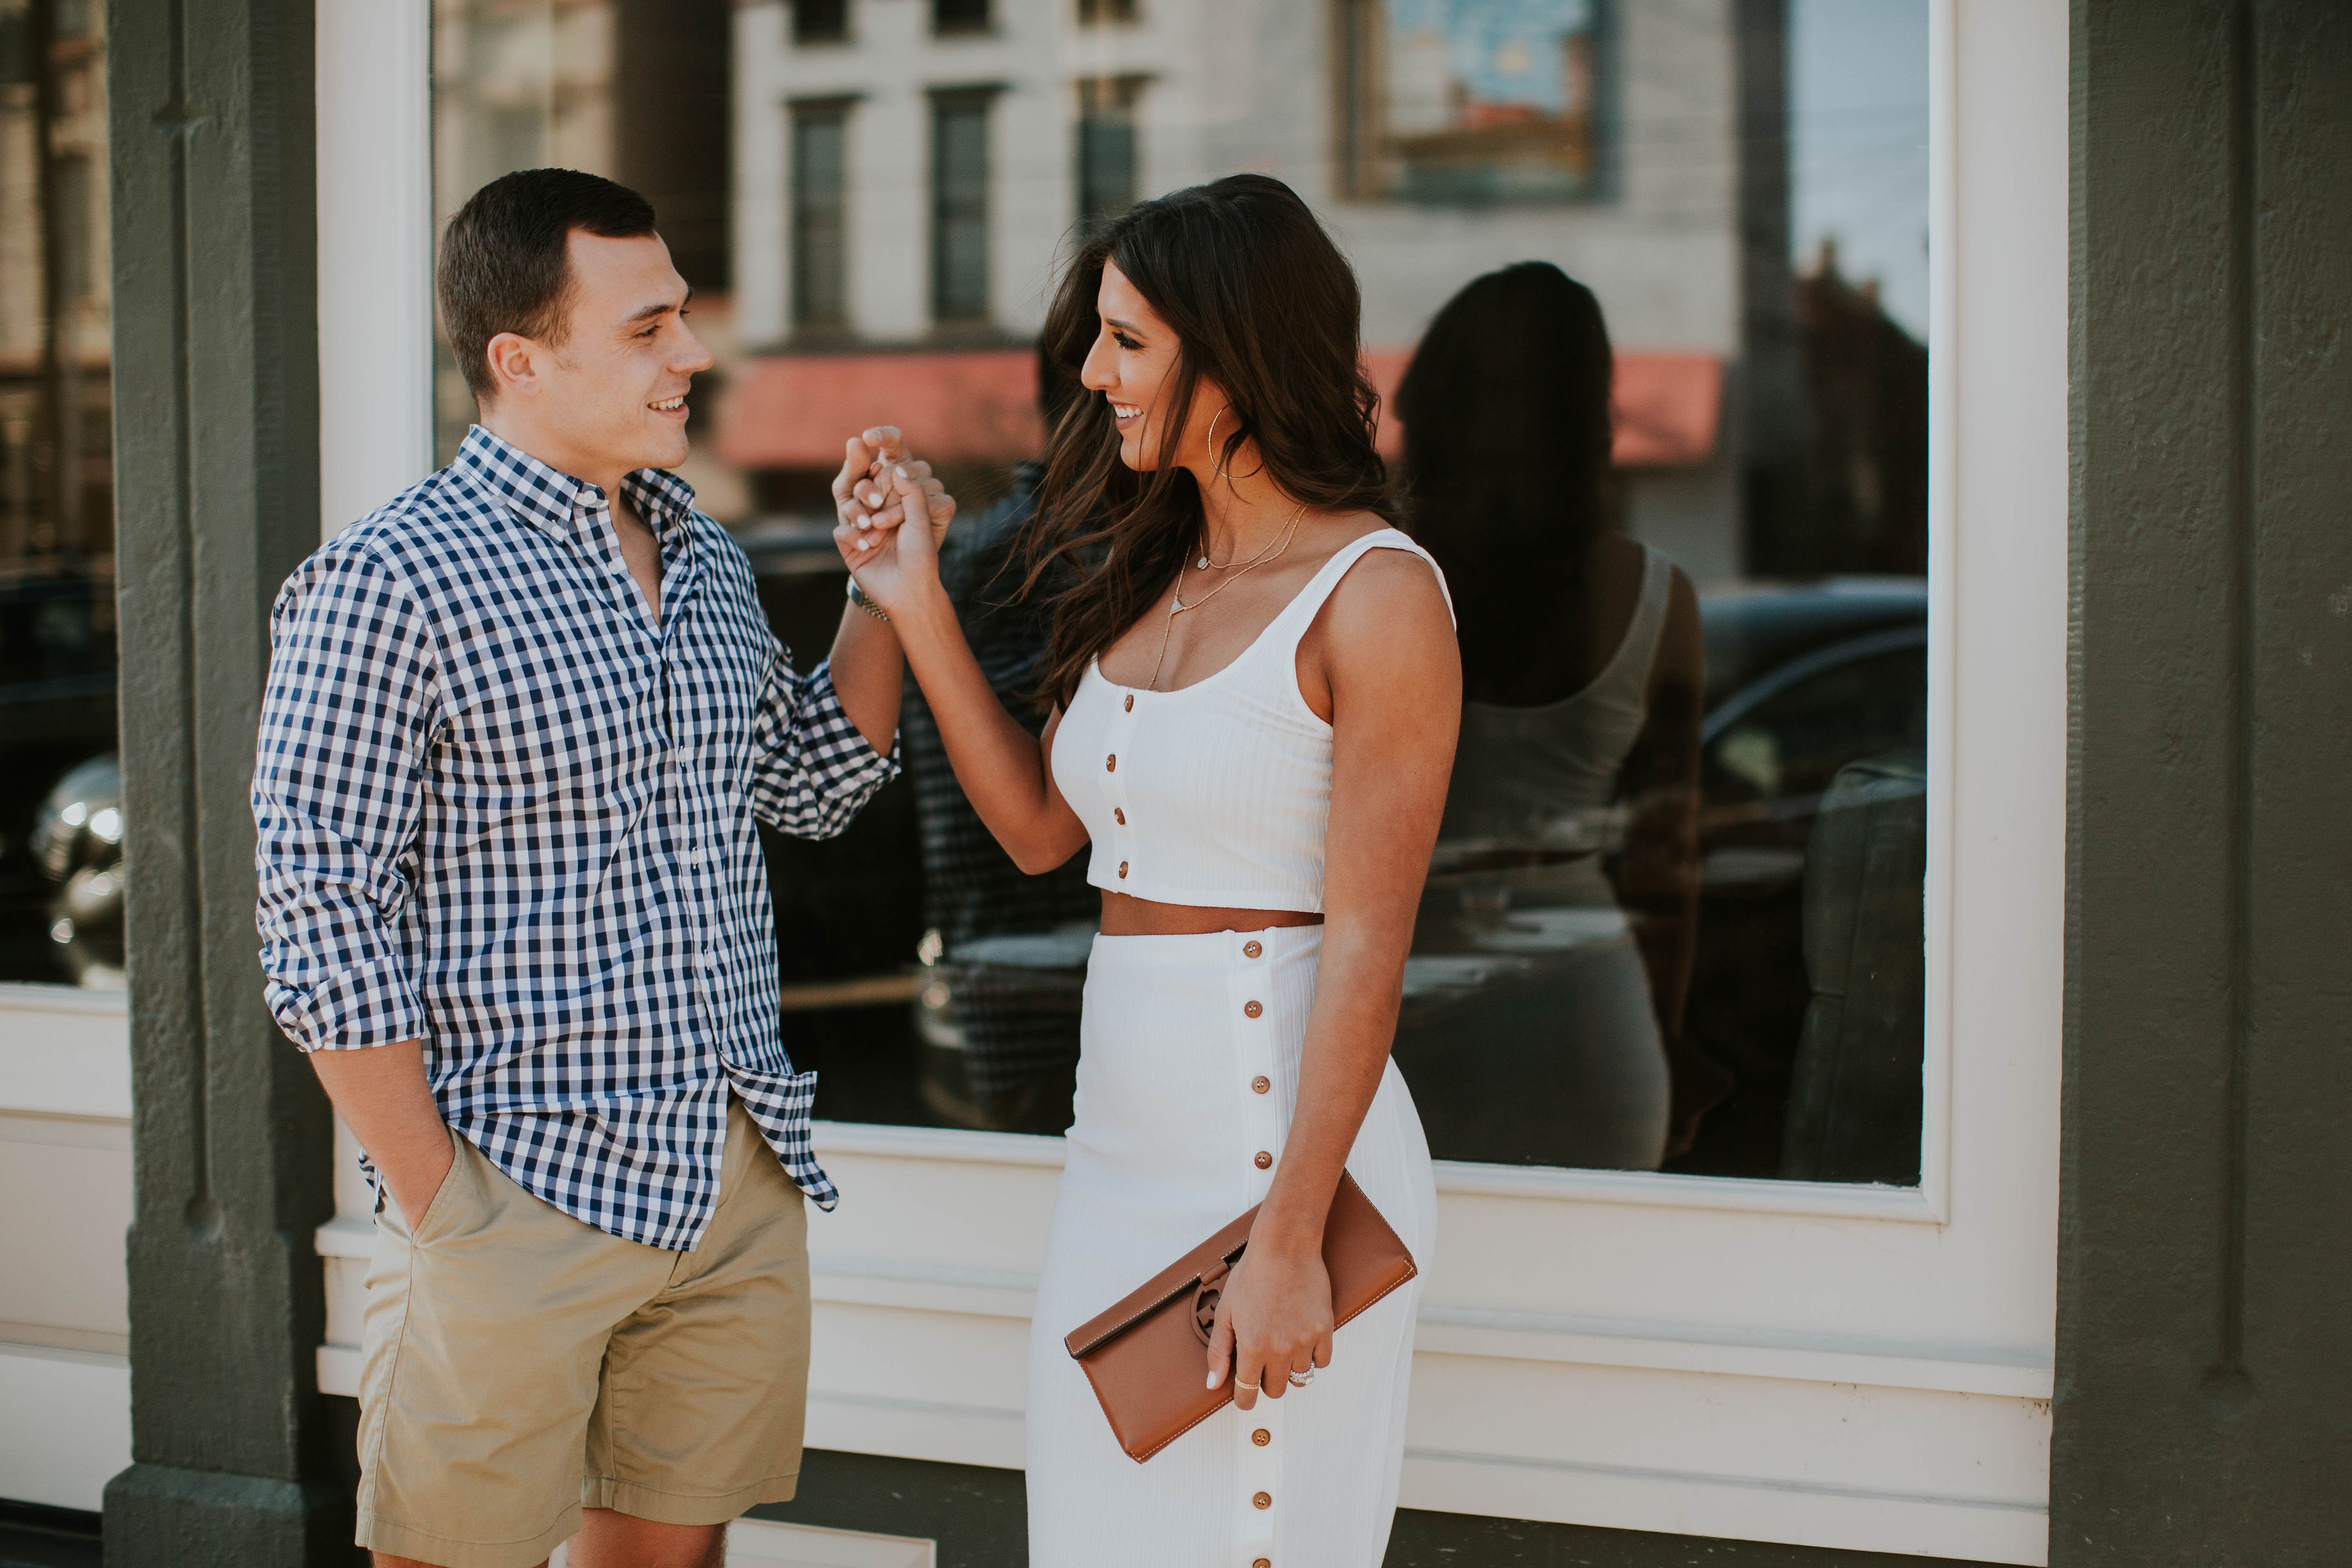 Why date nights matter, dating after marriage, married couples, marriage advice, benefits of monthly date nights, jordan white, grace white, grace wainwright, louisville ky // a southern drawl